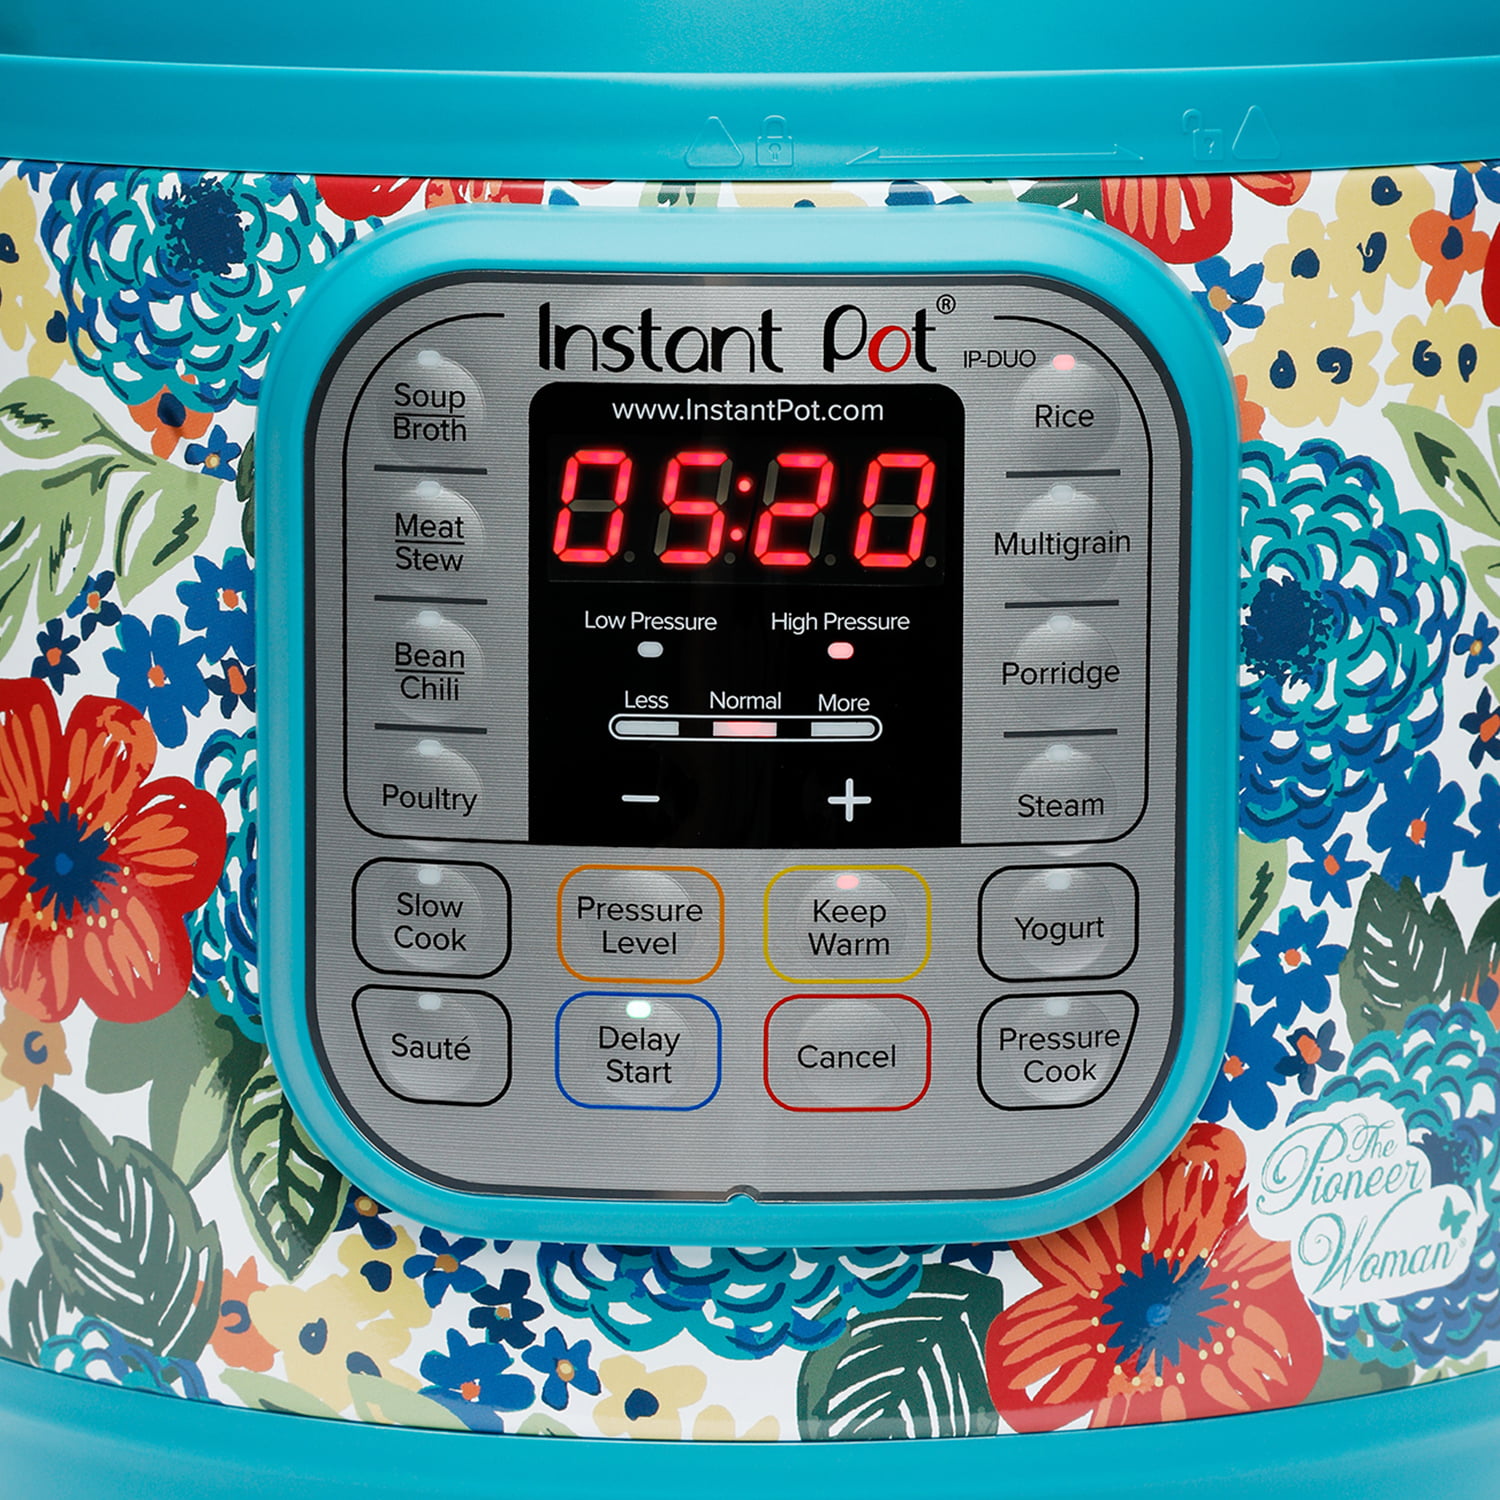 The Pioneer Woman Launches 2 Affordable Instant Pots for Color Fanatics -  Brit + Co